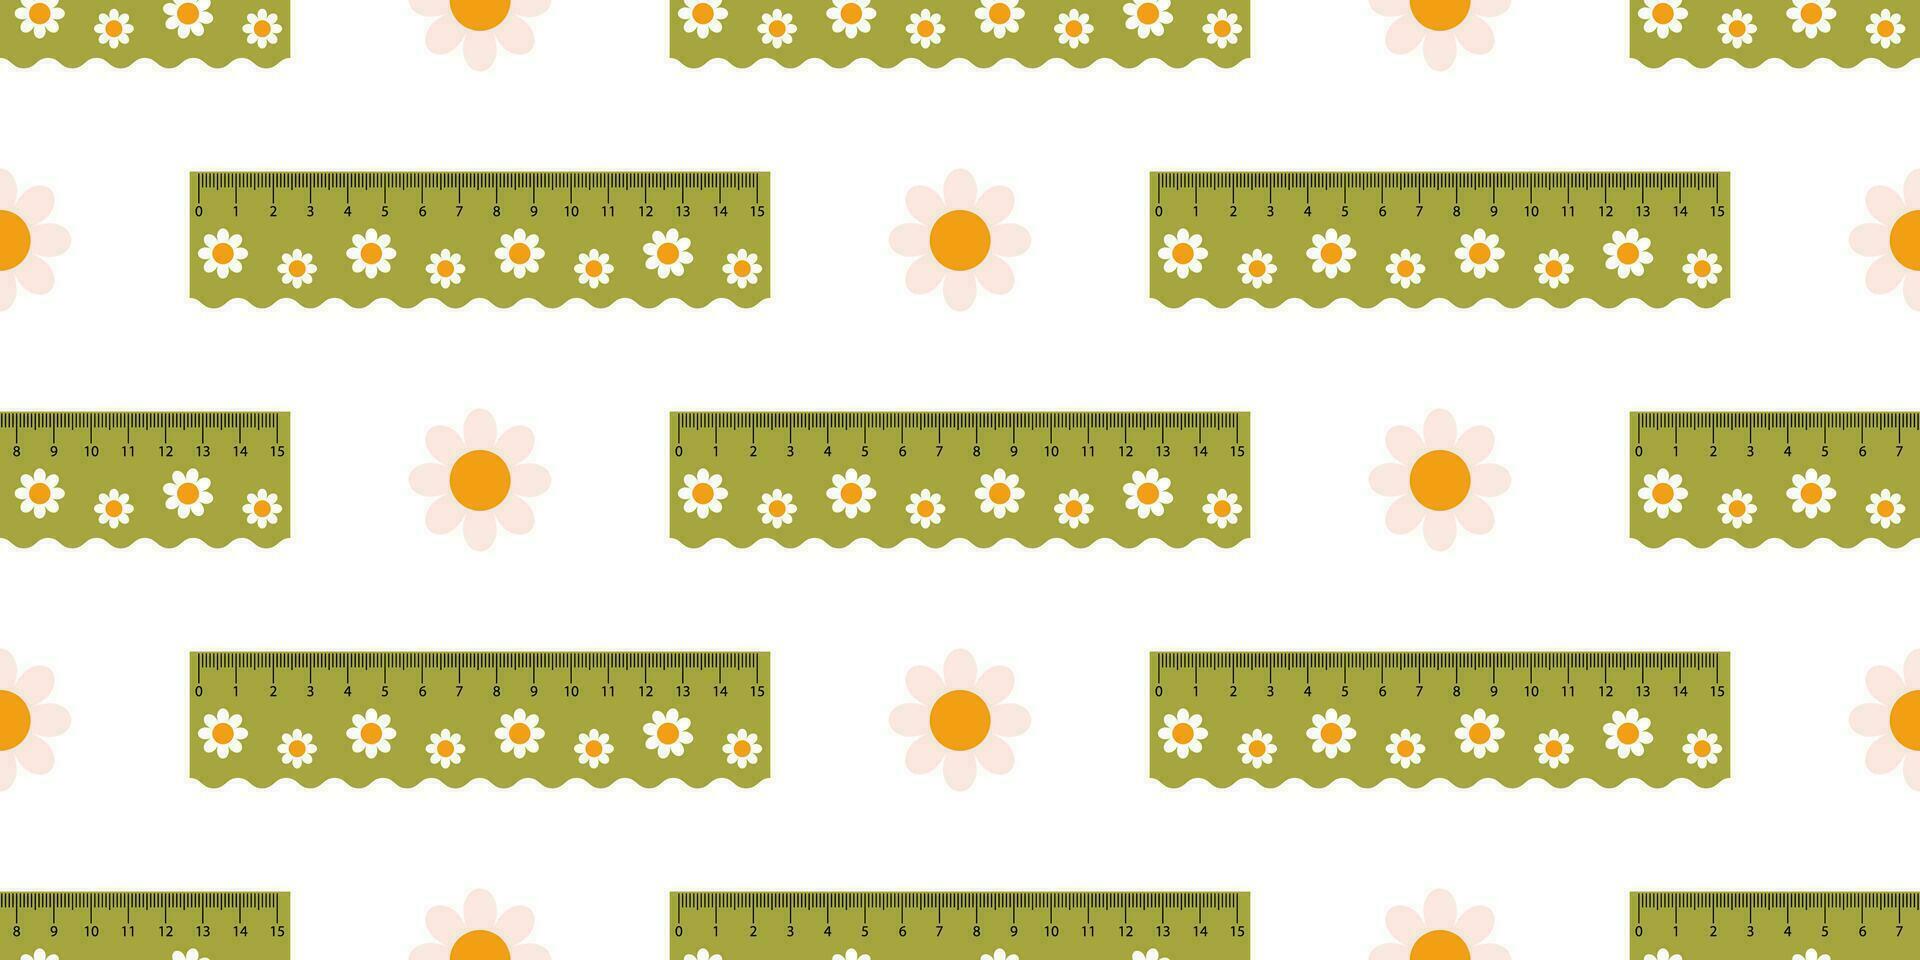 Vector seamless pattern with cute green measuring rulers. School rulers and chamomile flowers on white background in flat design.  Print with measuring tools.